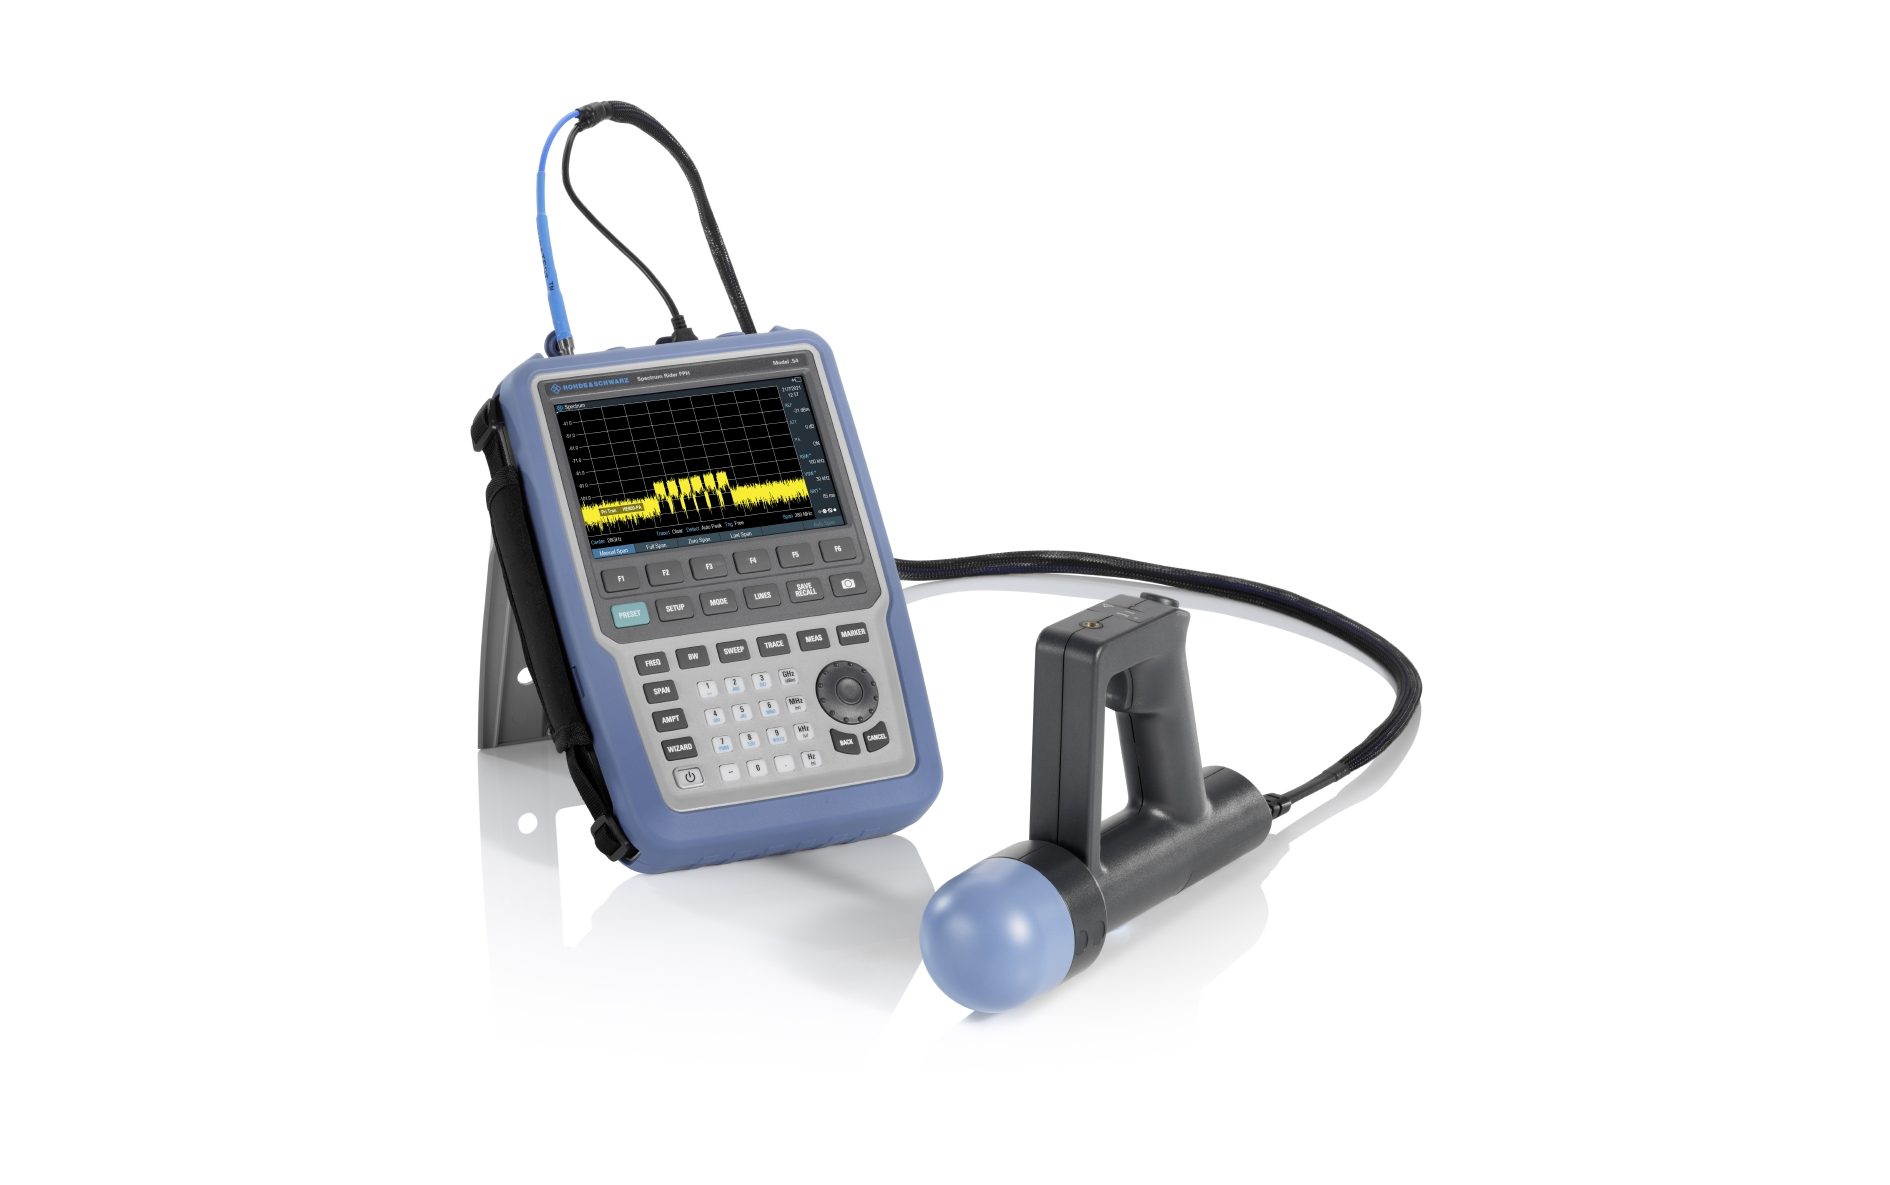 Rohde & Schwarz extends portable analyzer frequency ranges up to 44 GHz